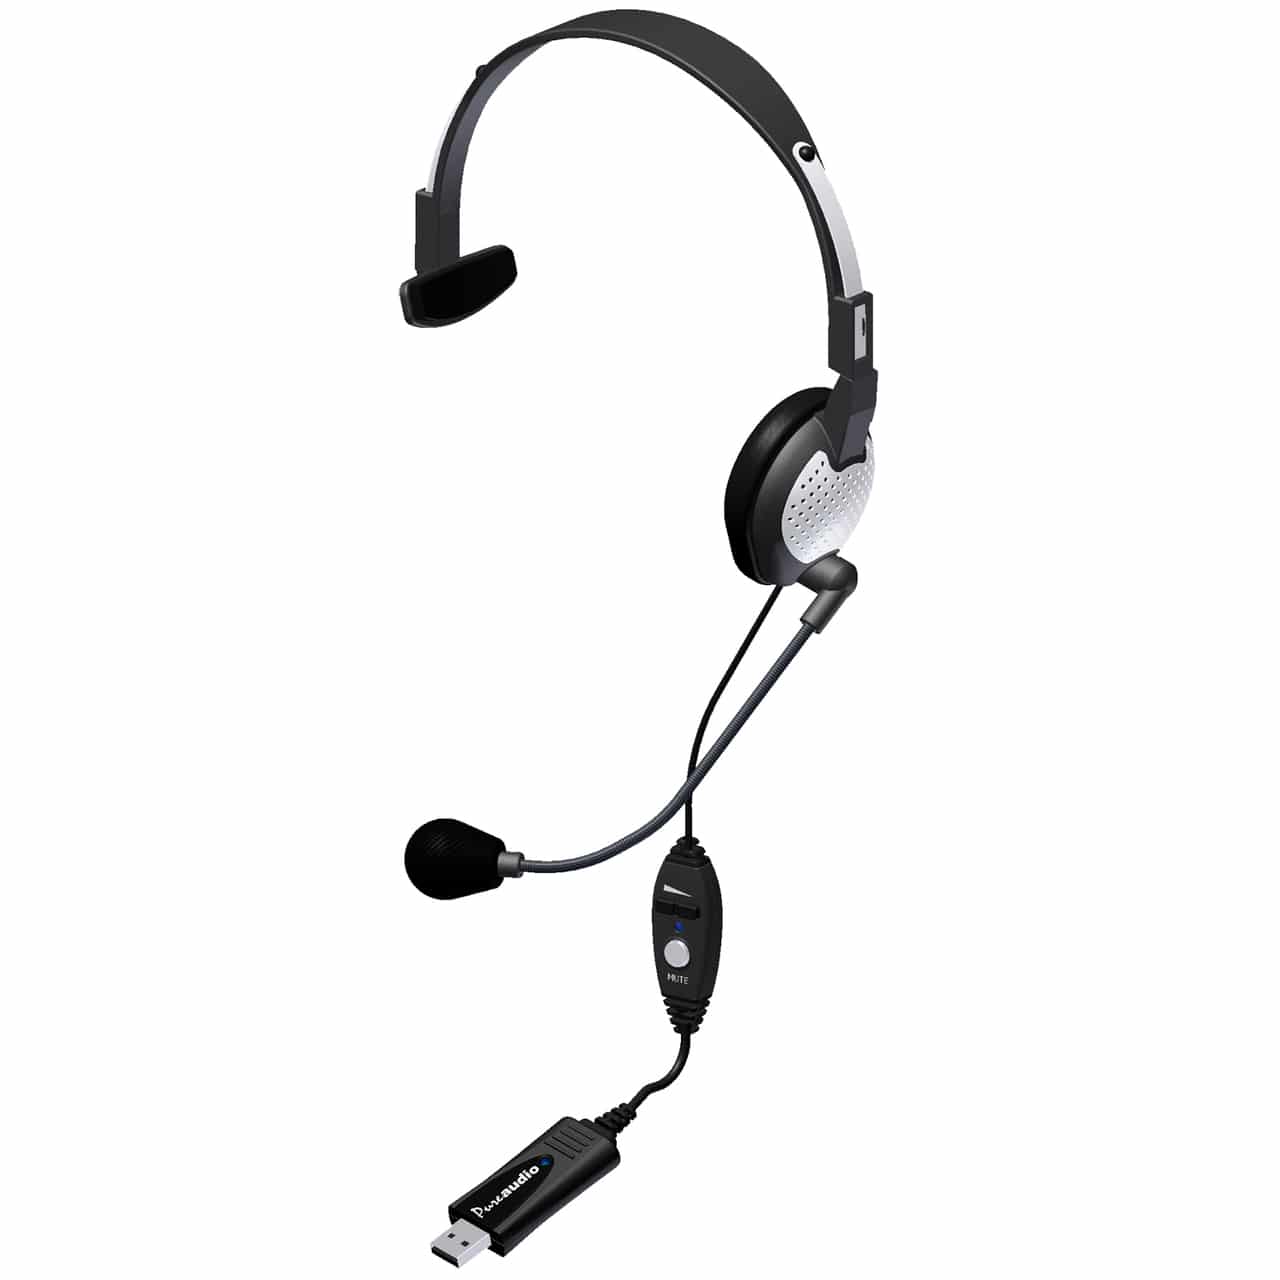 Andrea NC-181VM USB Headset – Headsets for Gaming, Skype and